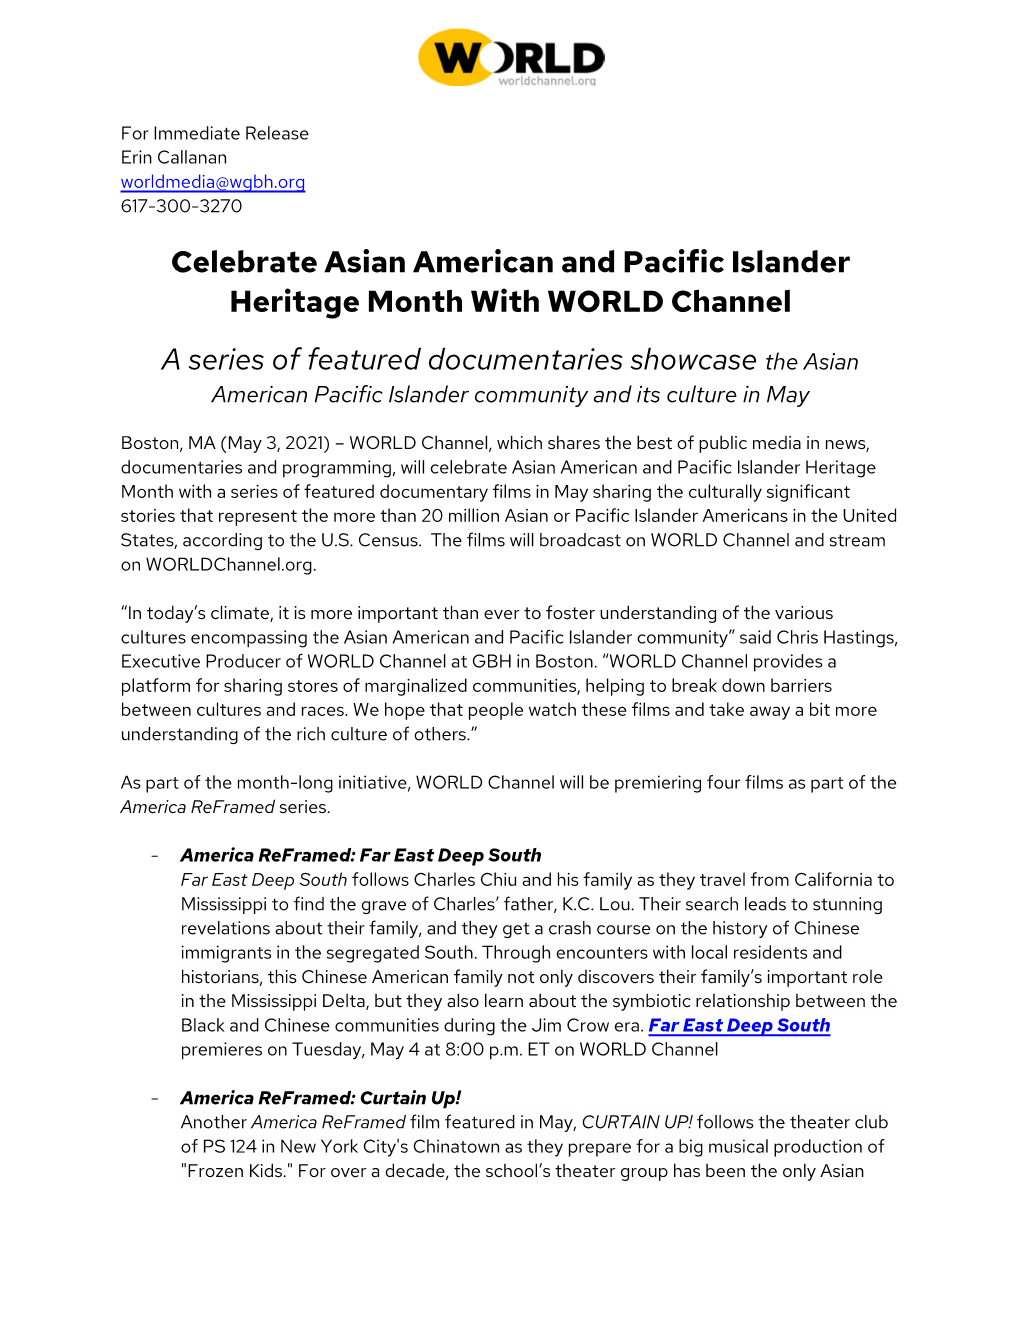 Celebrate Asian American and Pacific Islander Heritage Month with WORLD Channel